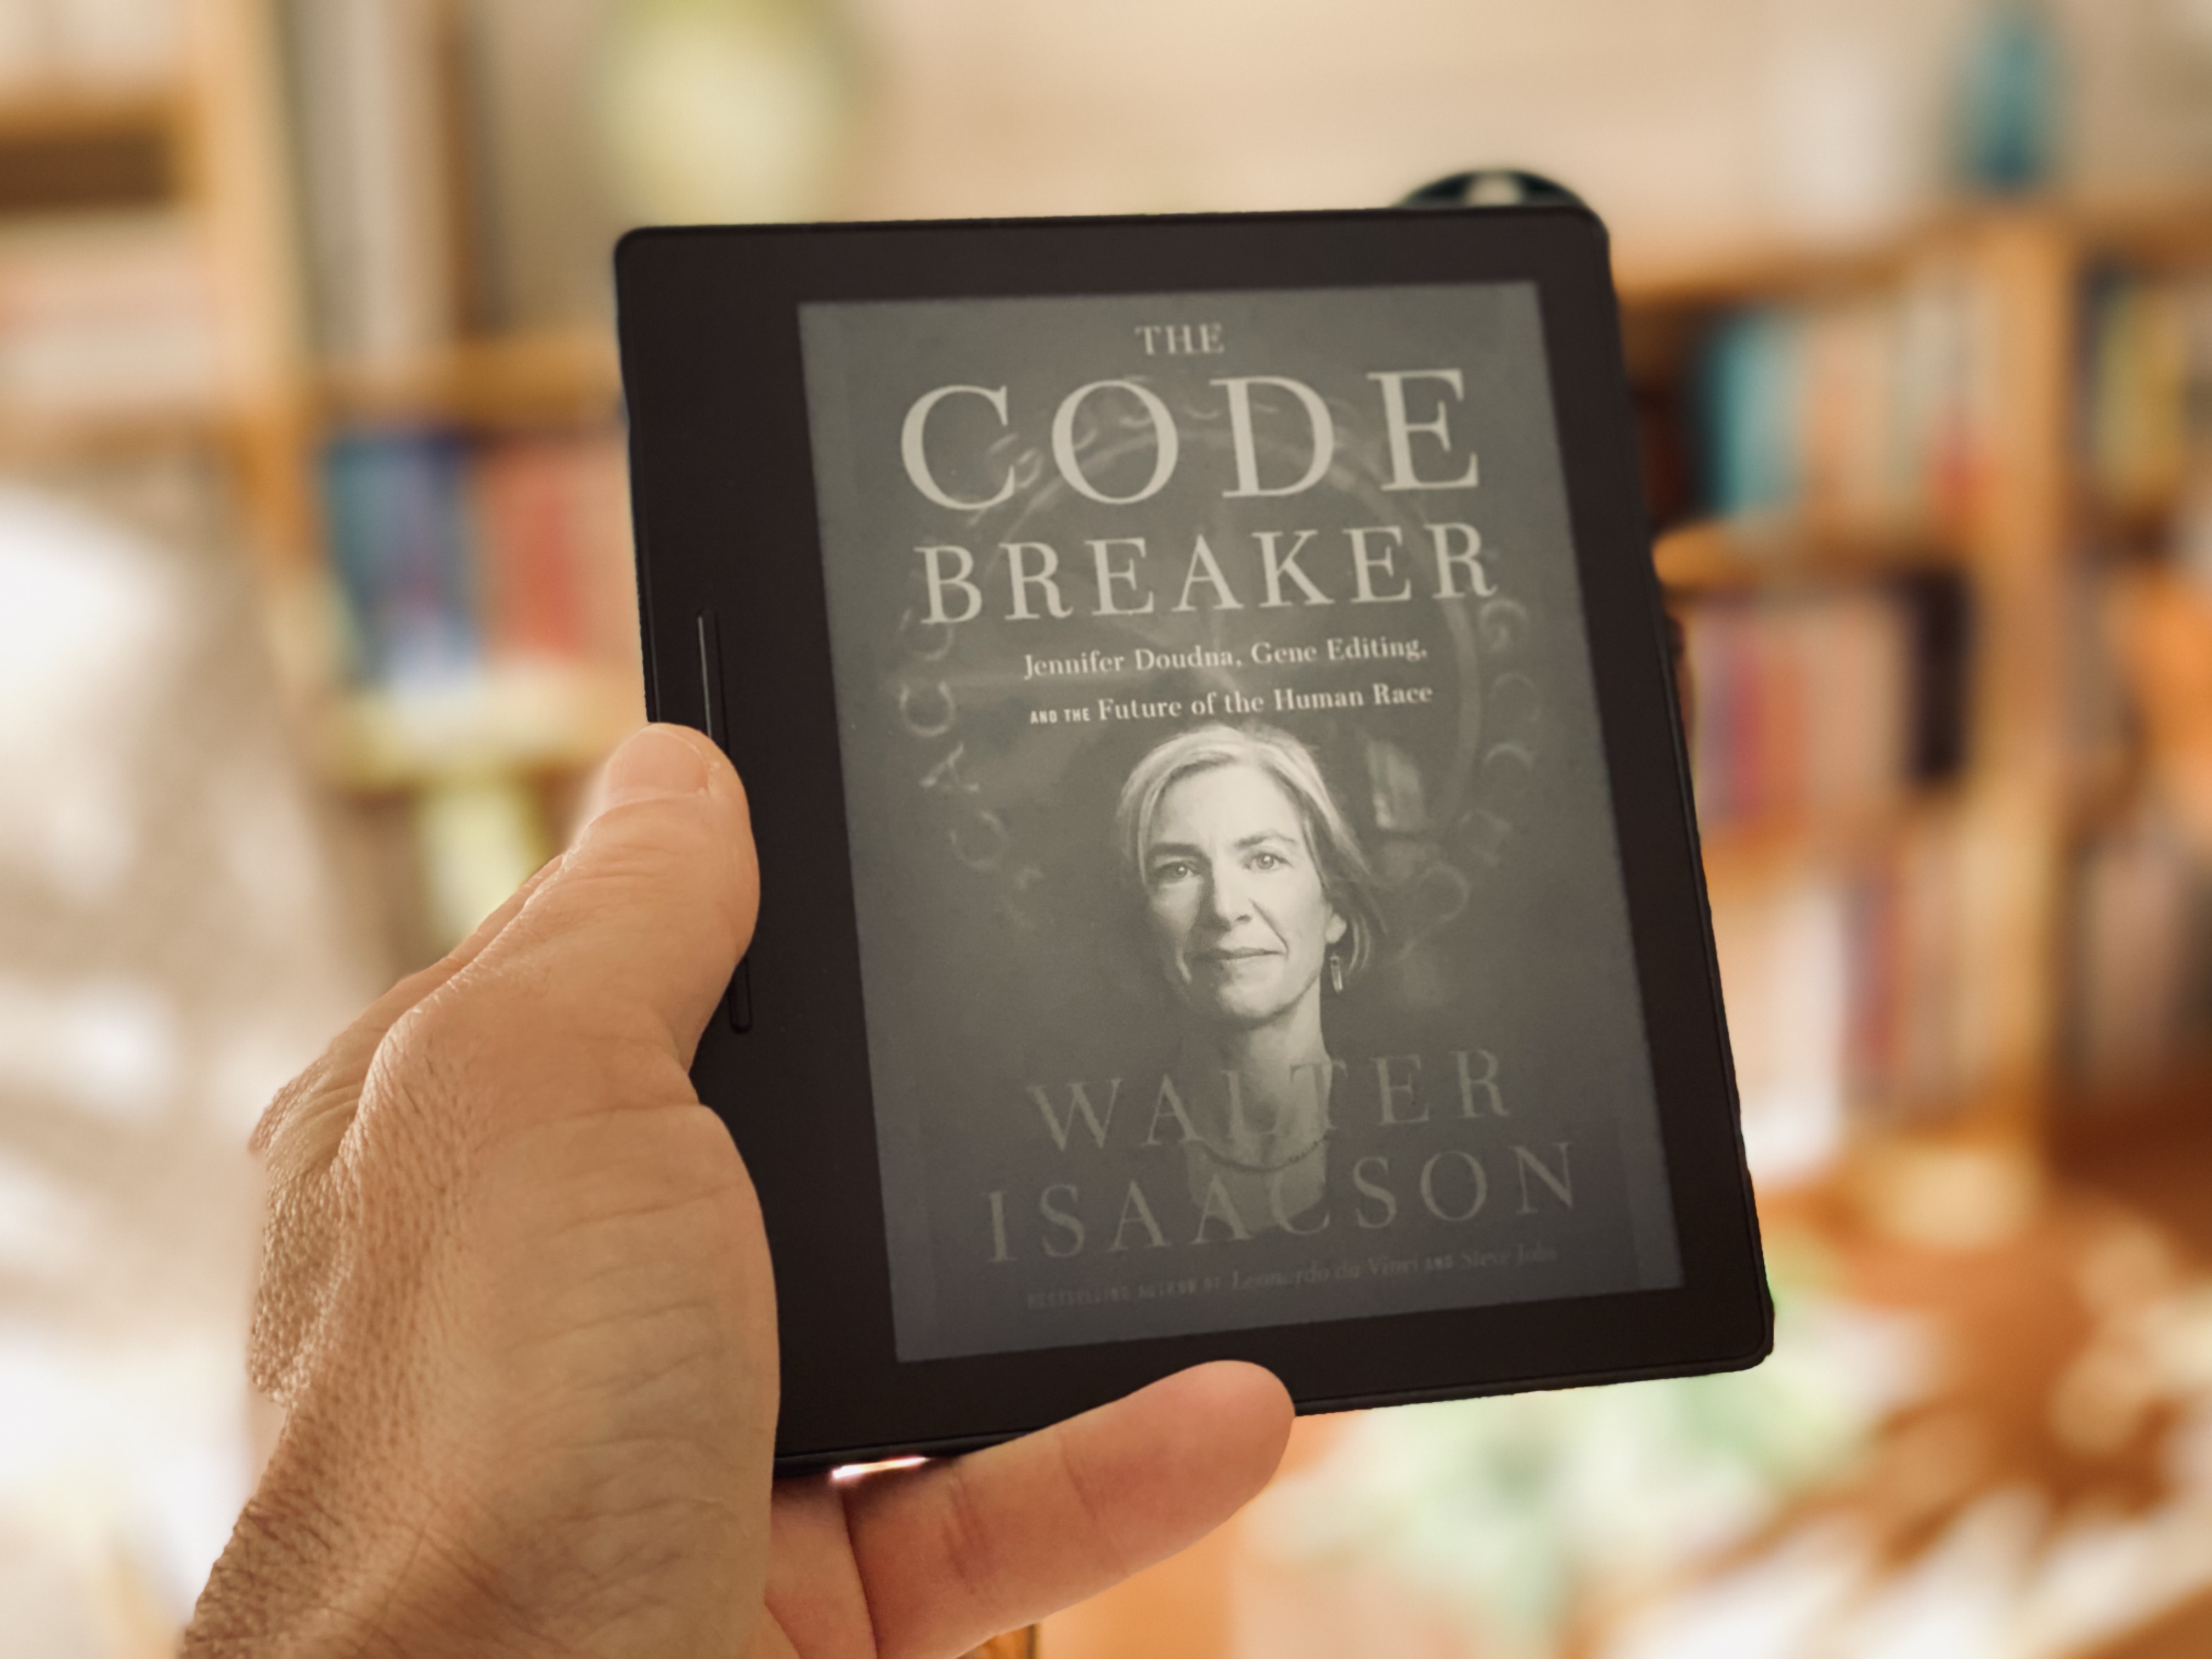 Kindle Oasis with the Code Breaker book cover